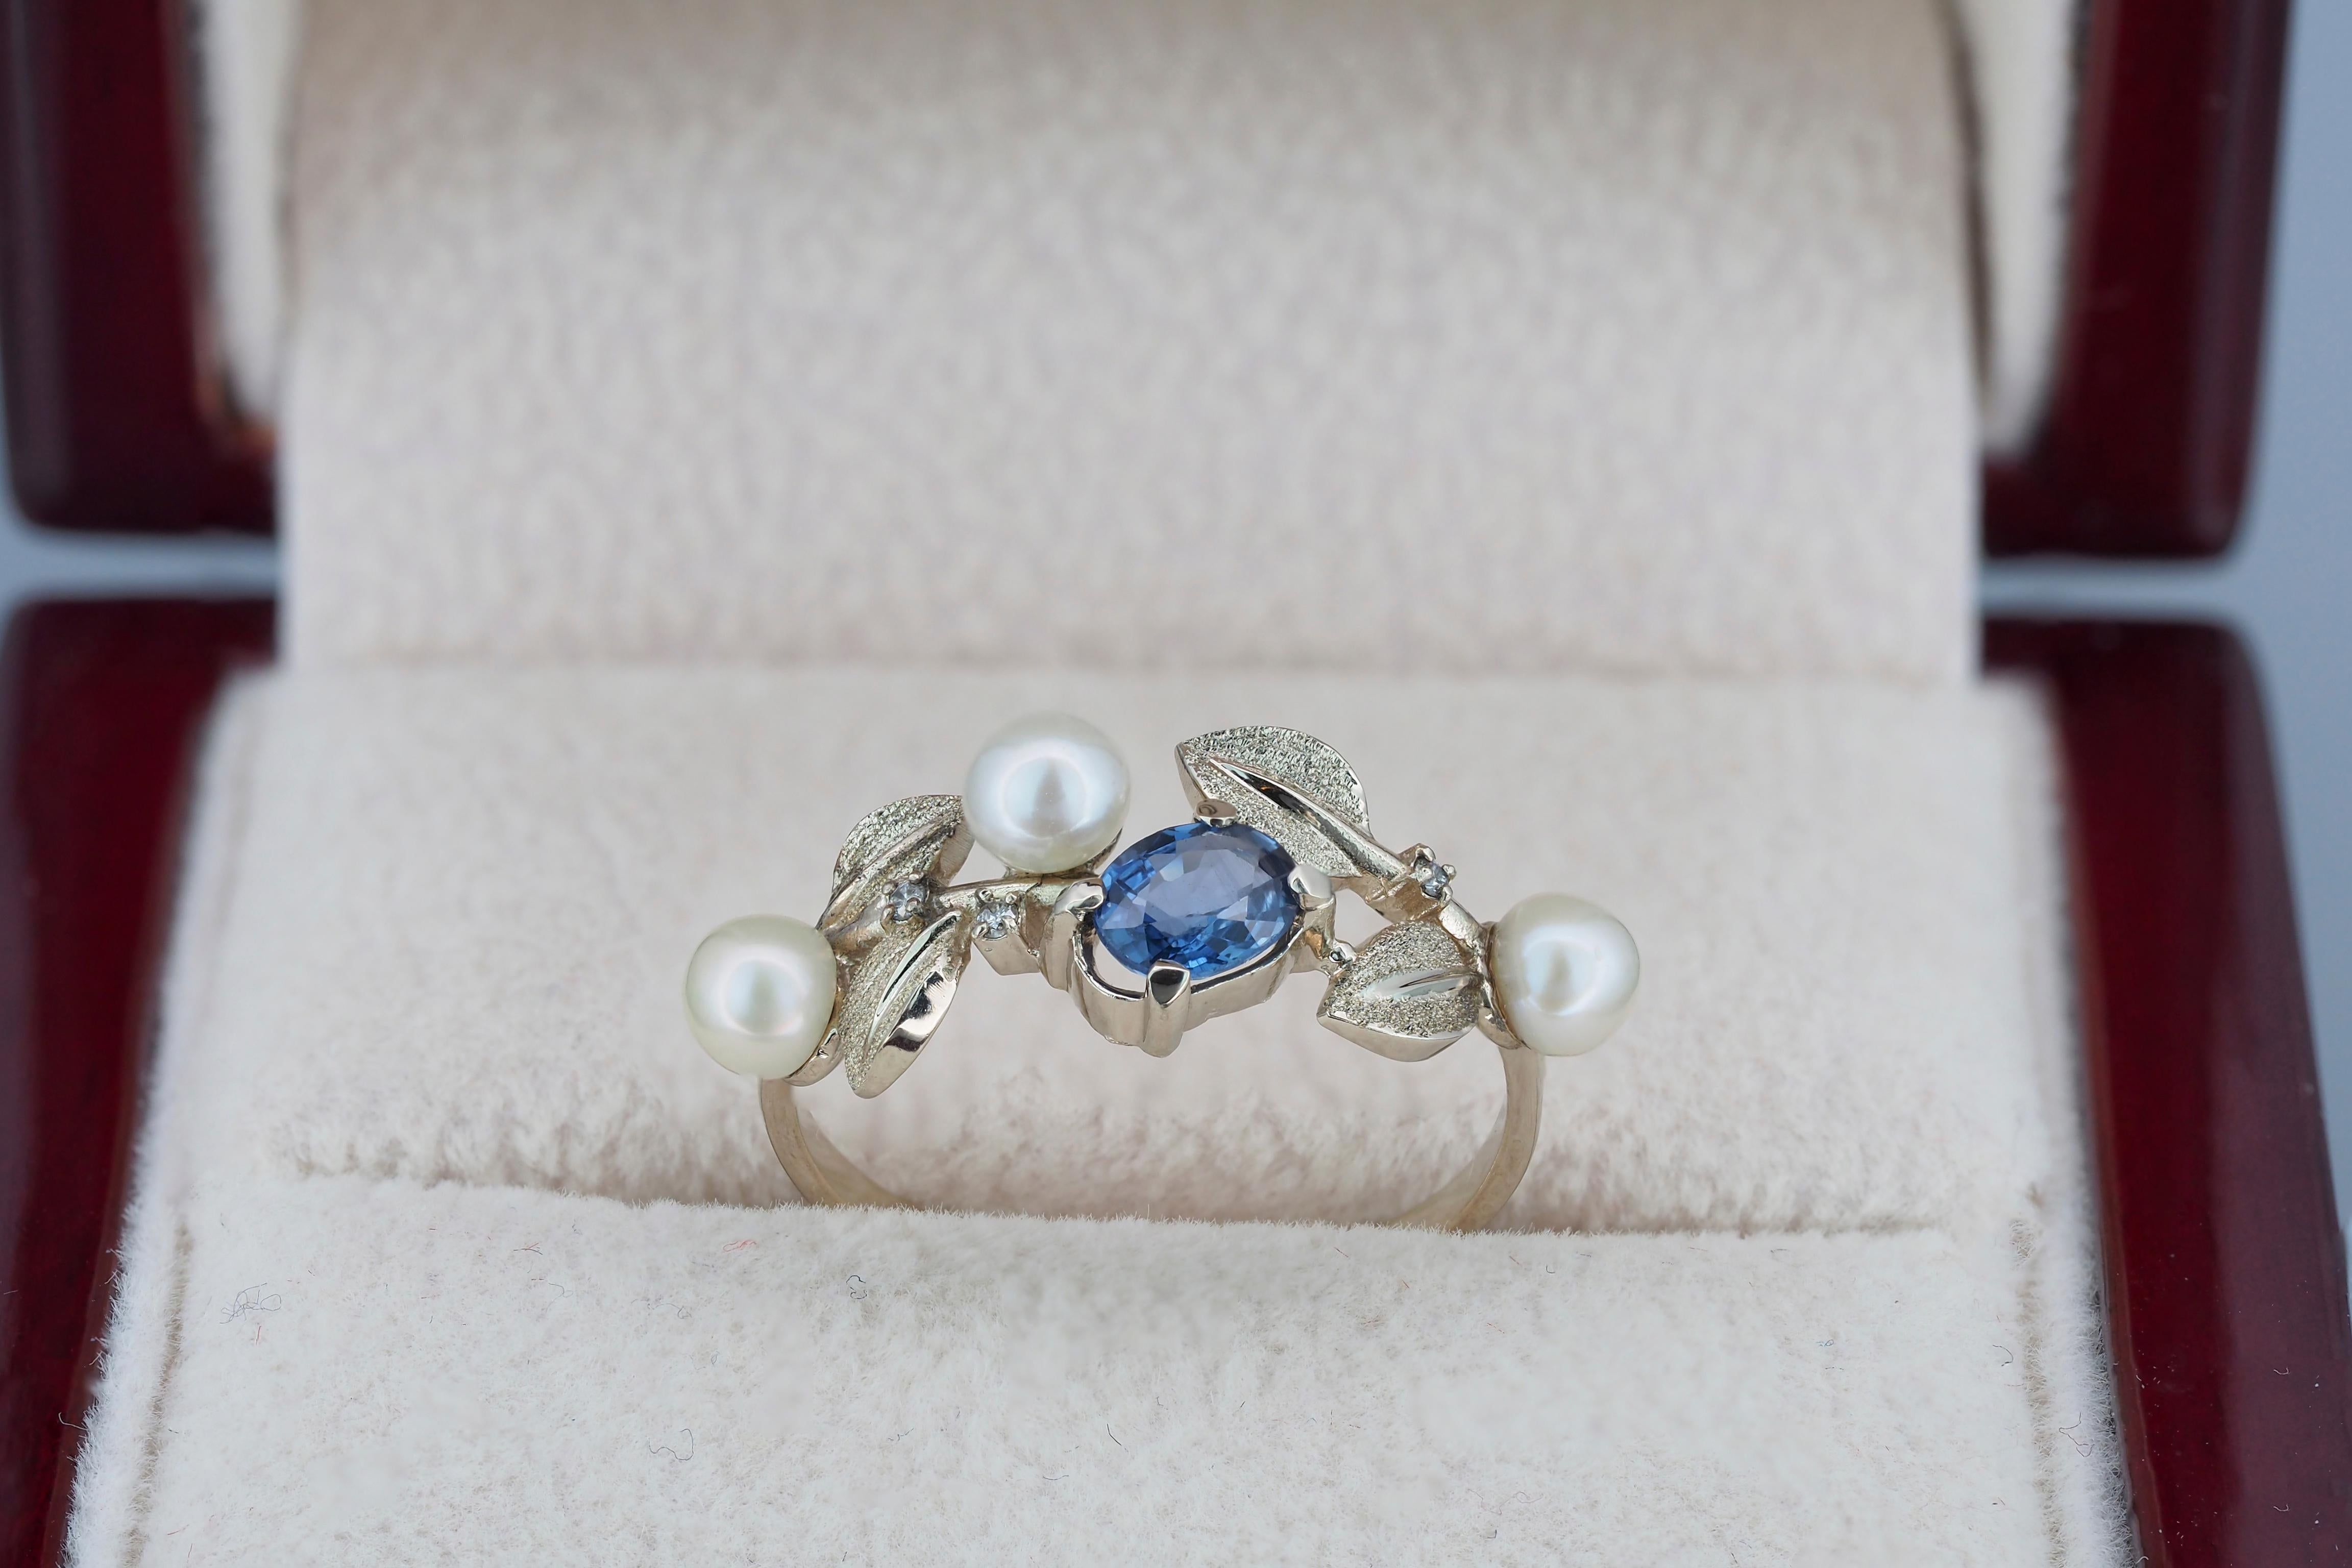 For Sale:  14k Gold Floral Ring with Sapphire, Diamonds and Pearls 4